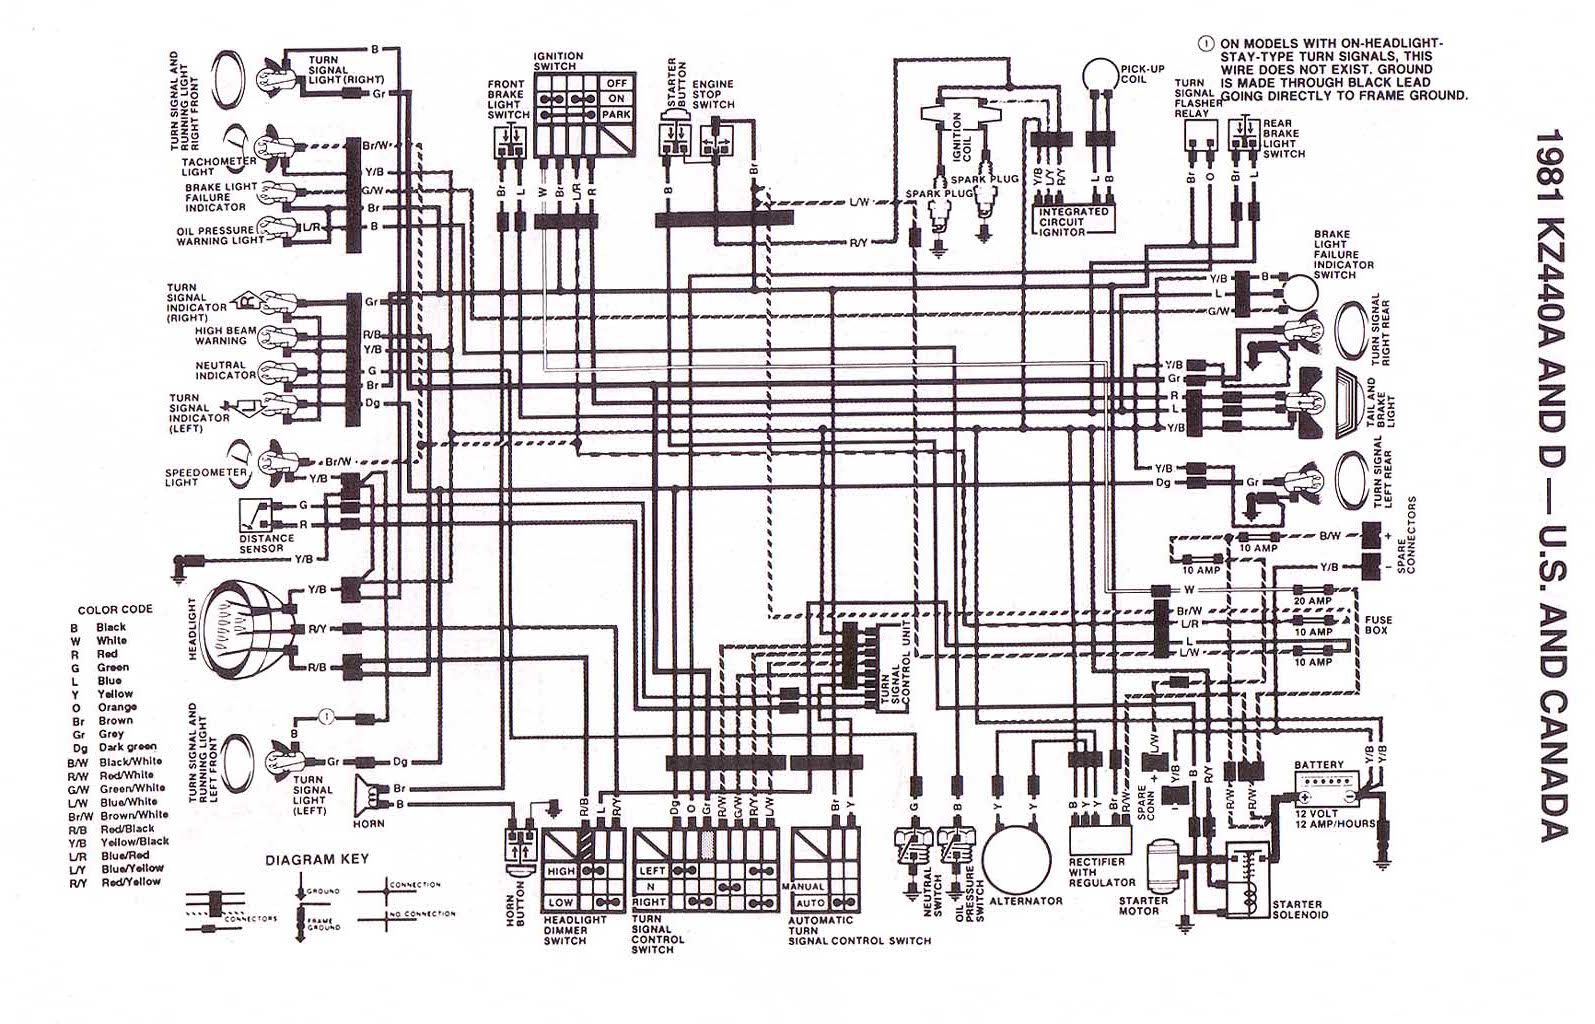 does anyone have a wiring diagram that is legible ? - KZRider Forum